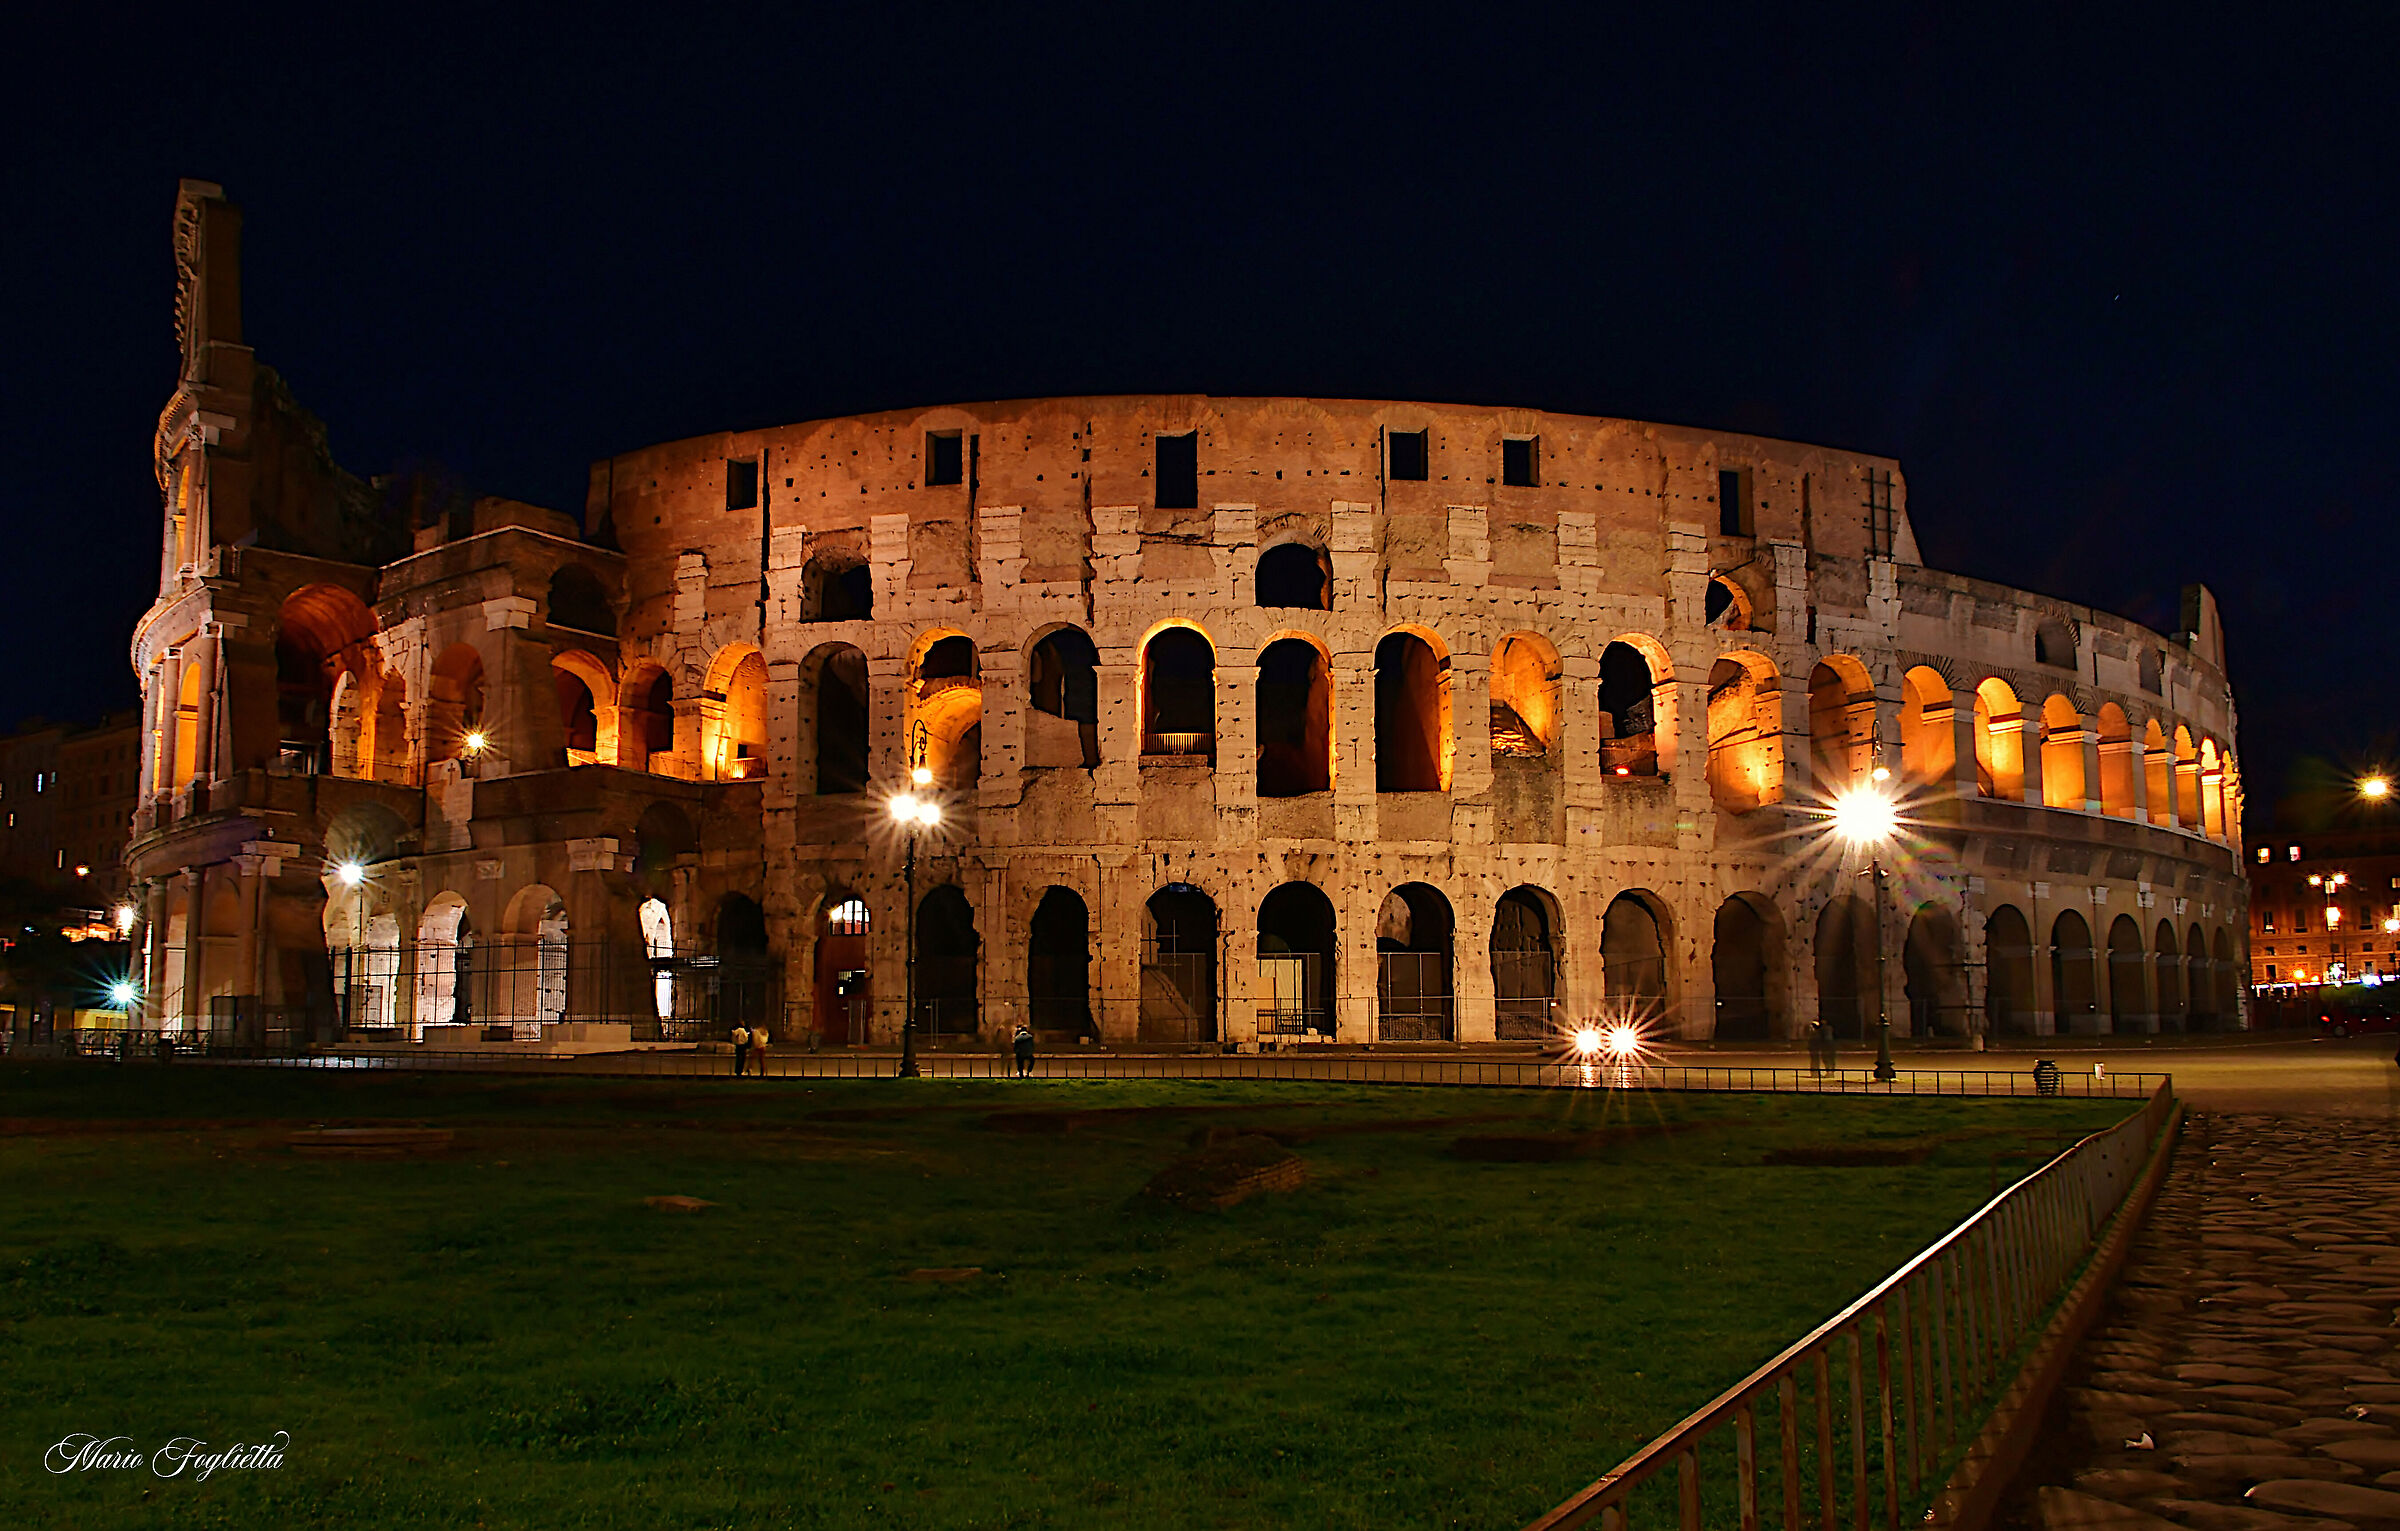 Evening falls on the Colosseum.........